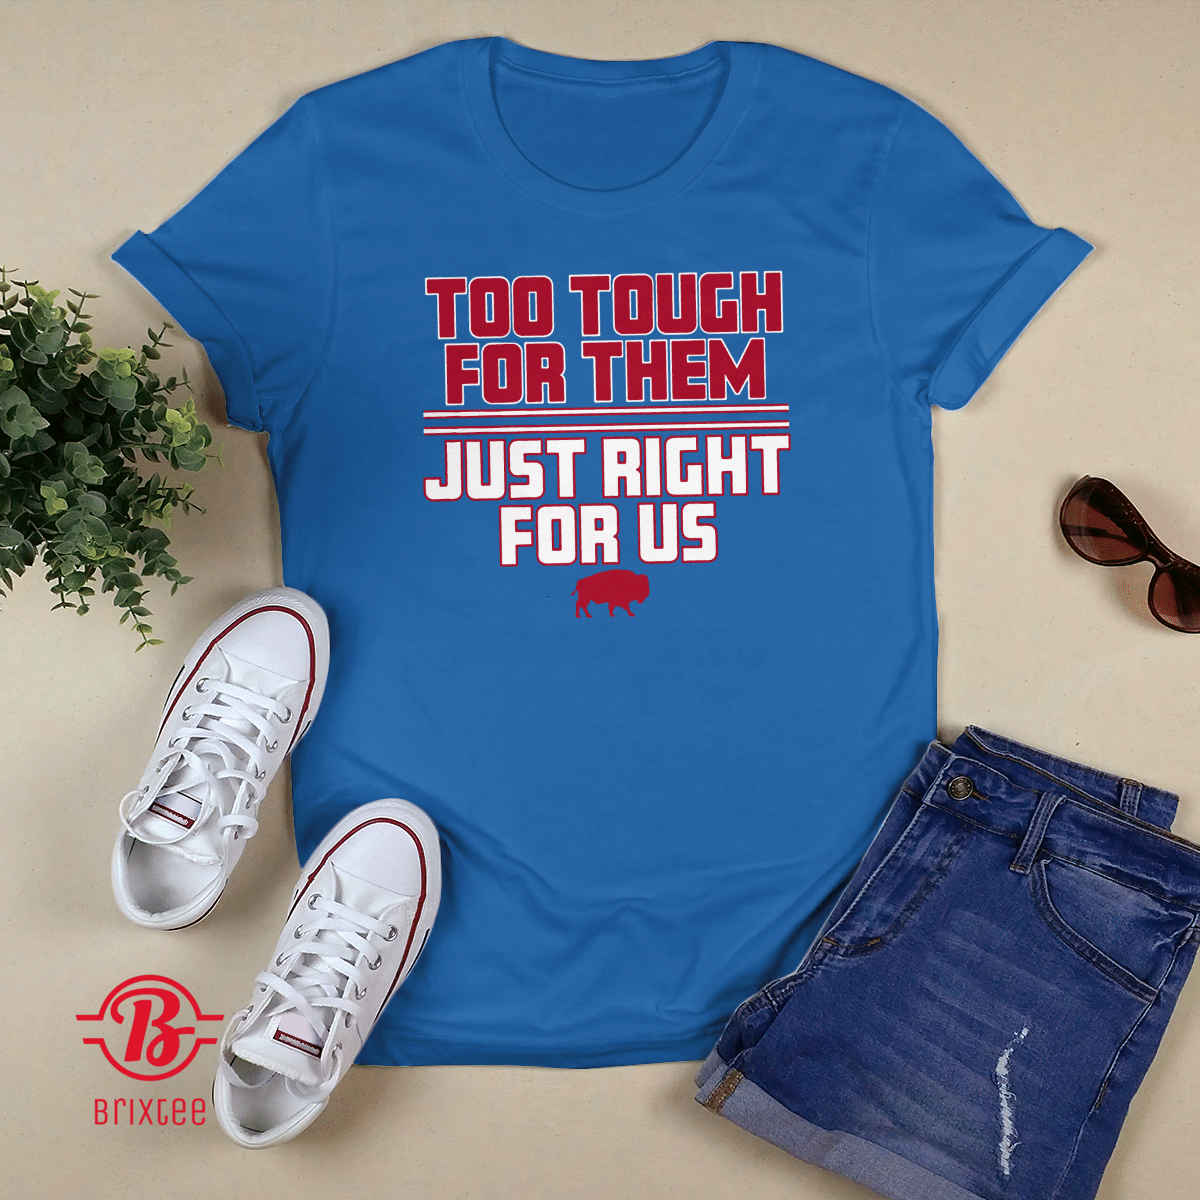 Too Tough For Them, Just Right For Us - Buffalo Bills